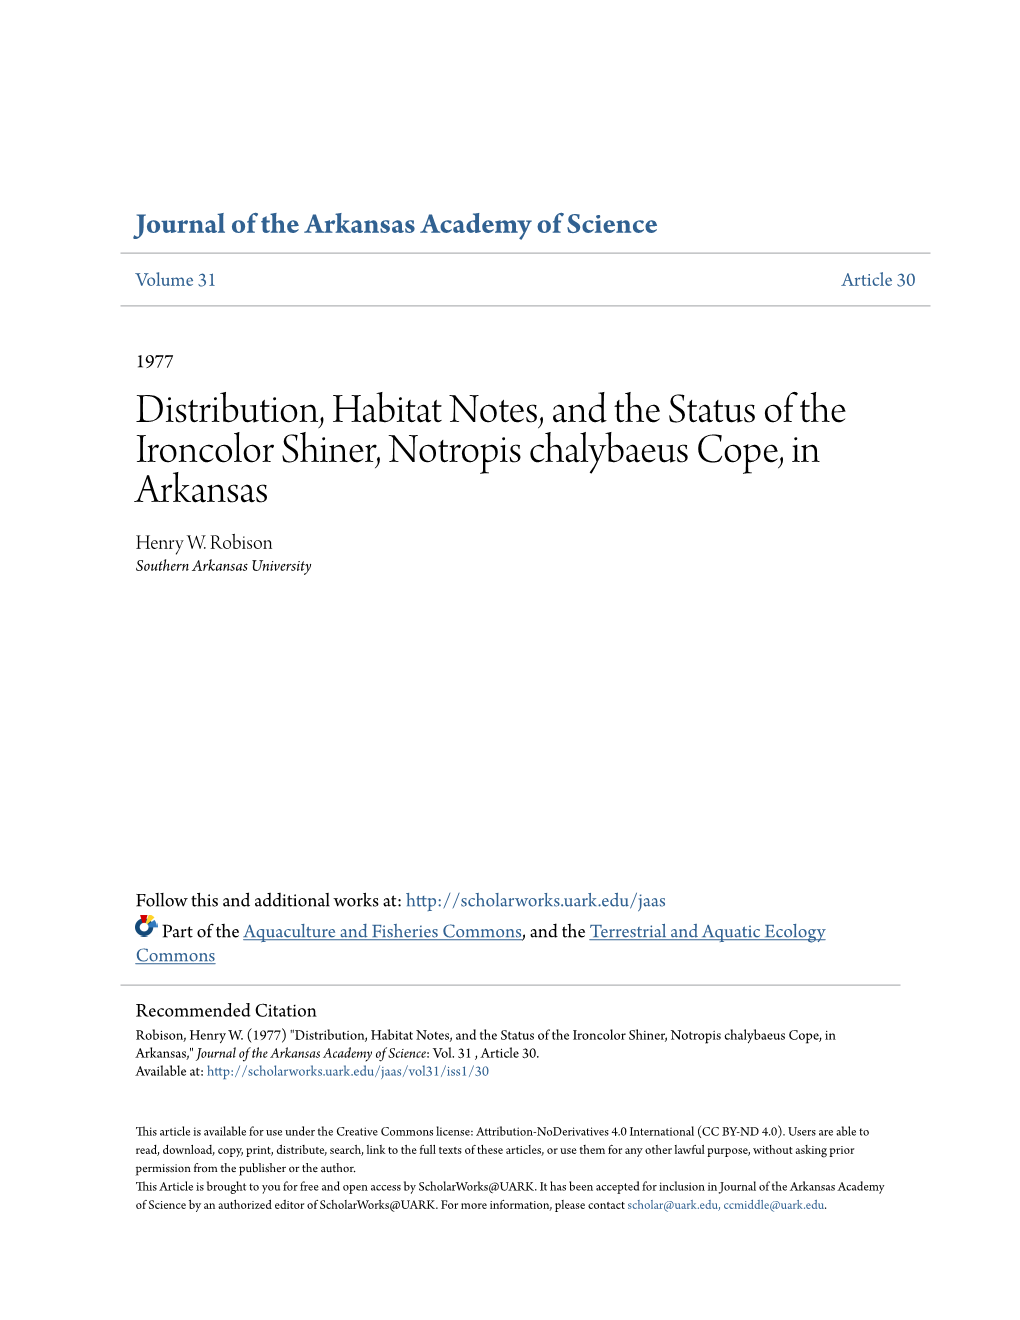 Distribution, Habitat Notes, and the Status of the Ironcolor Shiner, Notropis Chalybaeus Cope, in Arkansas Henry W